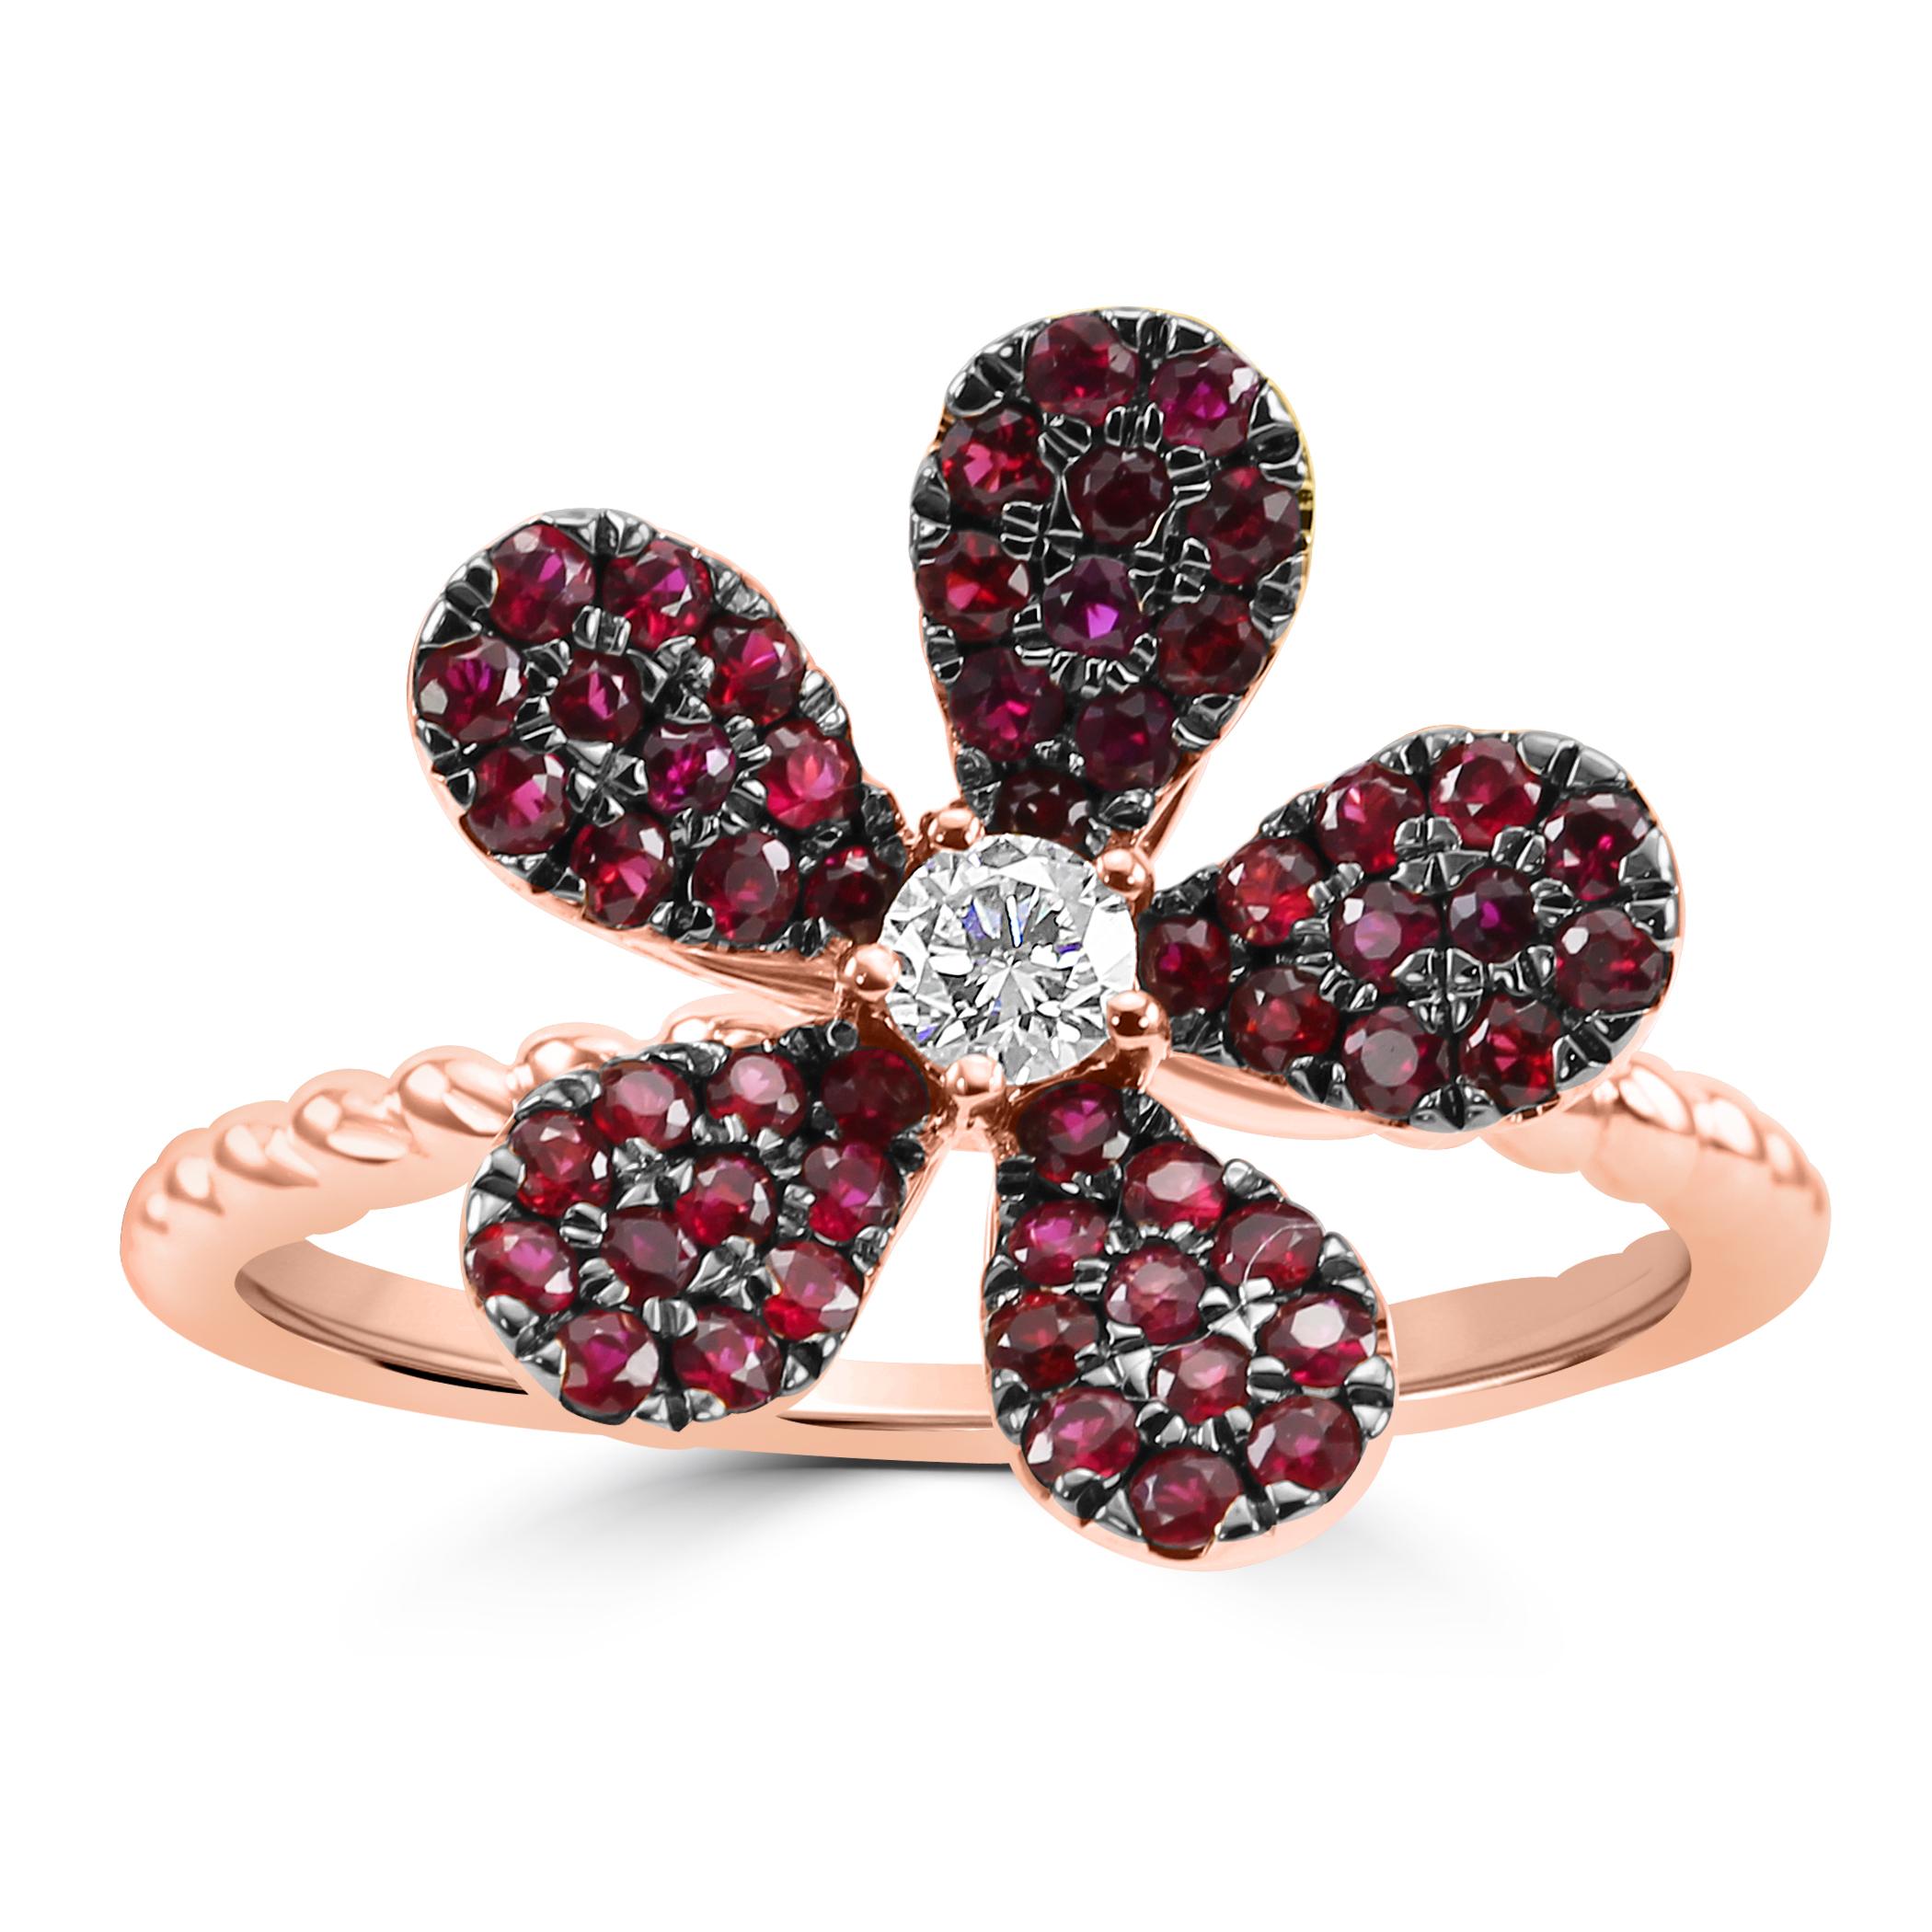 Osiyan is excited to introduce our flower-shaped ring, a true floral masterpiece that blooms with the vibrancy of 55 captivating Ruby stones totaling to 0.66 carats. Nestled at the heart of this floral arrangement is a single, brilliant White